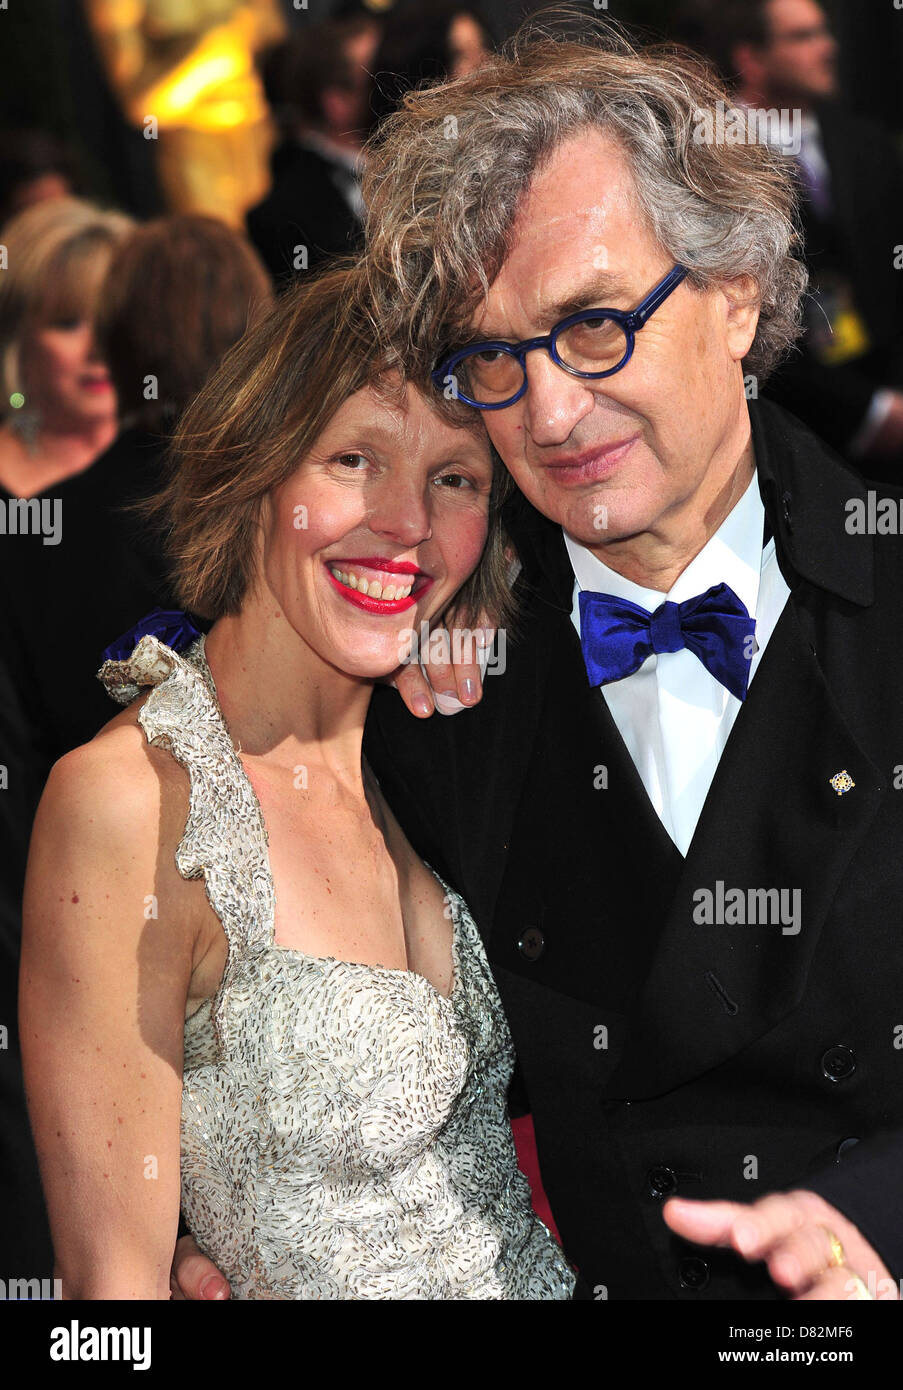 Wim Wenders and wife Donata Wenders 84th Annual Academy Awards (Oscars)  held at the Kodak Theatre - Arrivals Los Angeles Stock Photo - Alamy